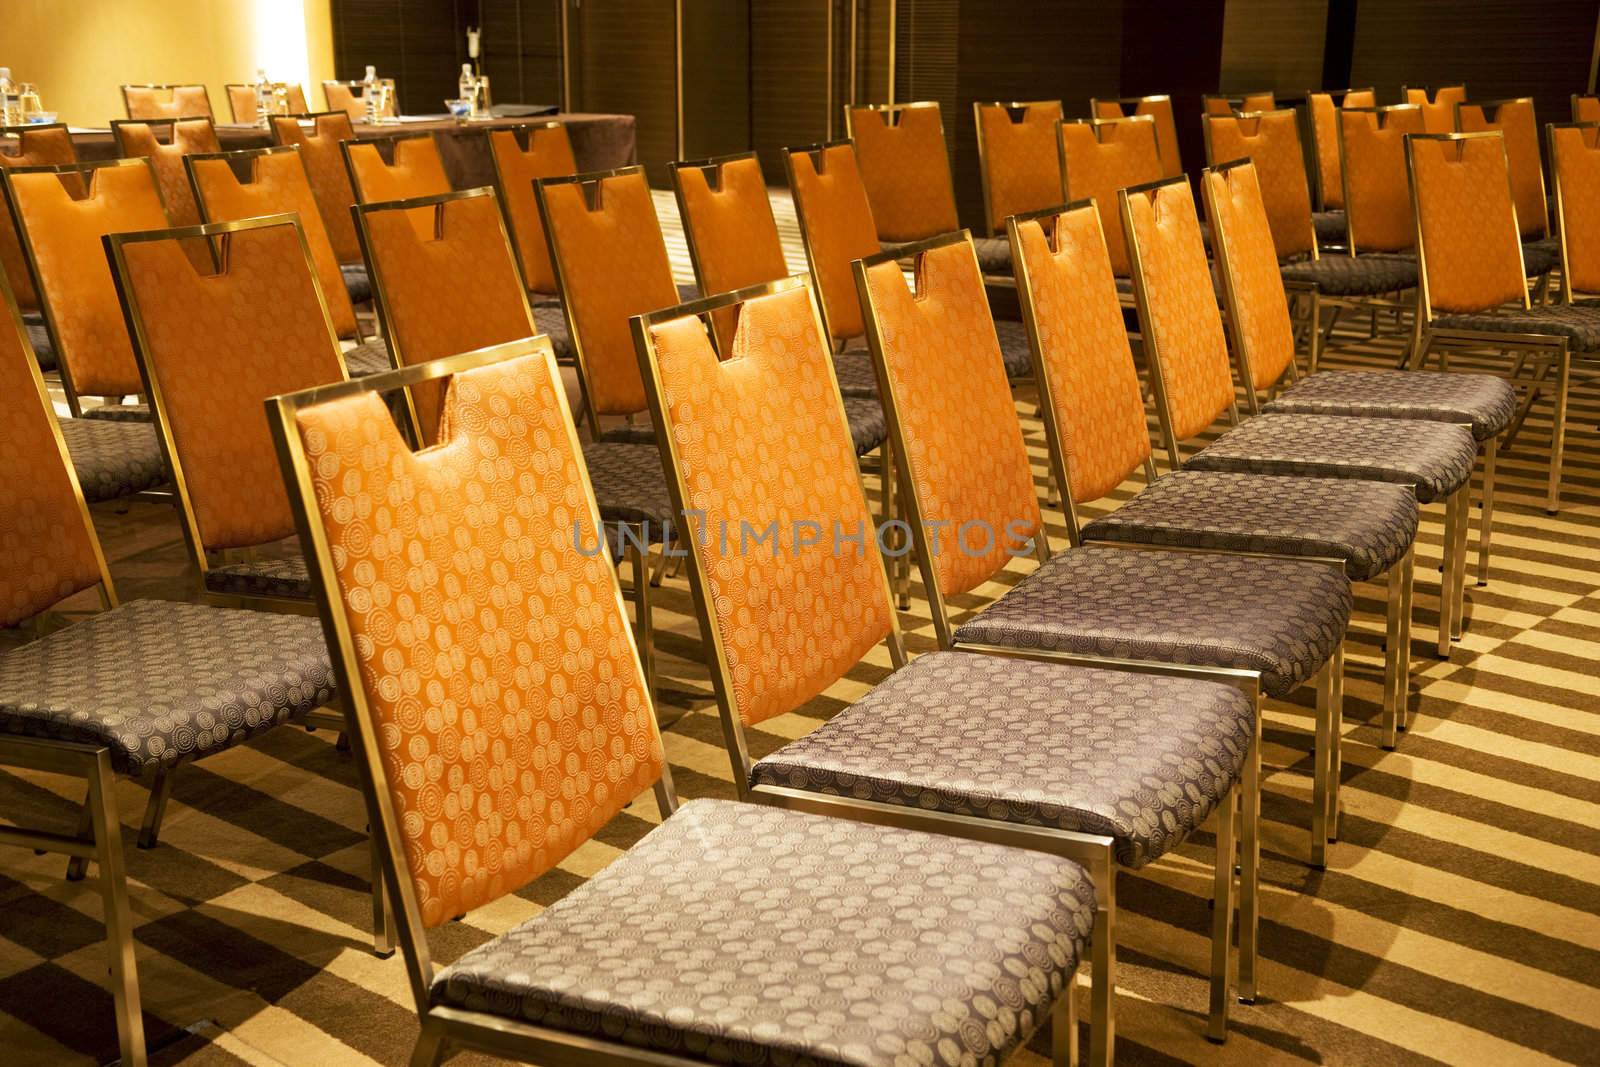 Image of rows of colourful chairs at a seminar room.
